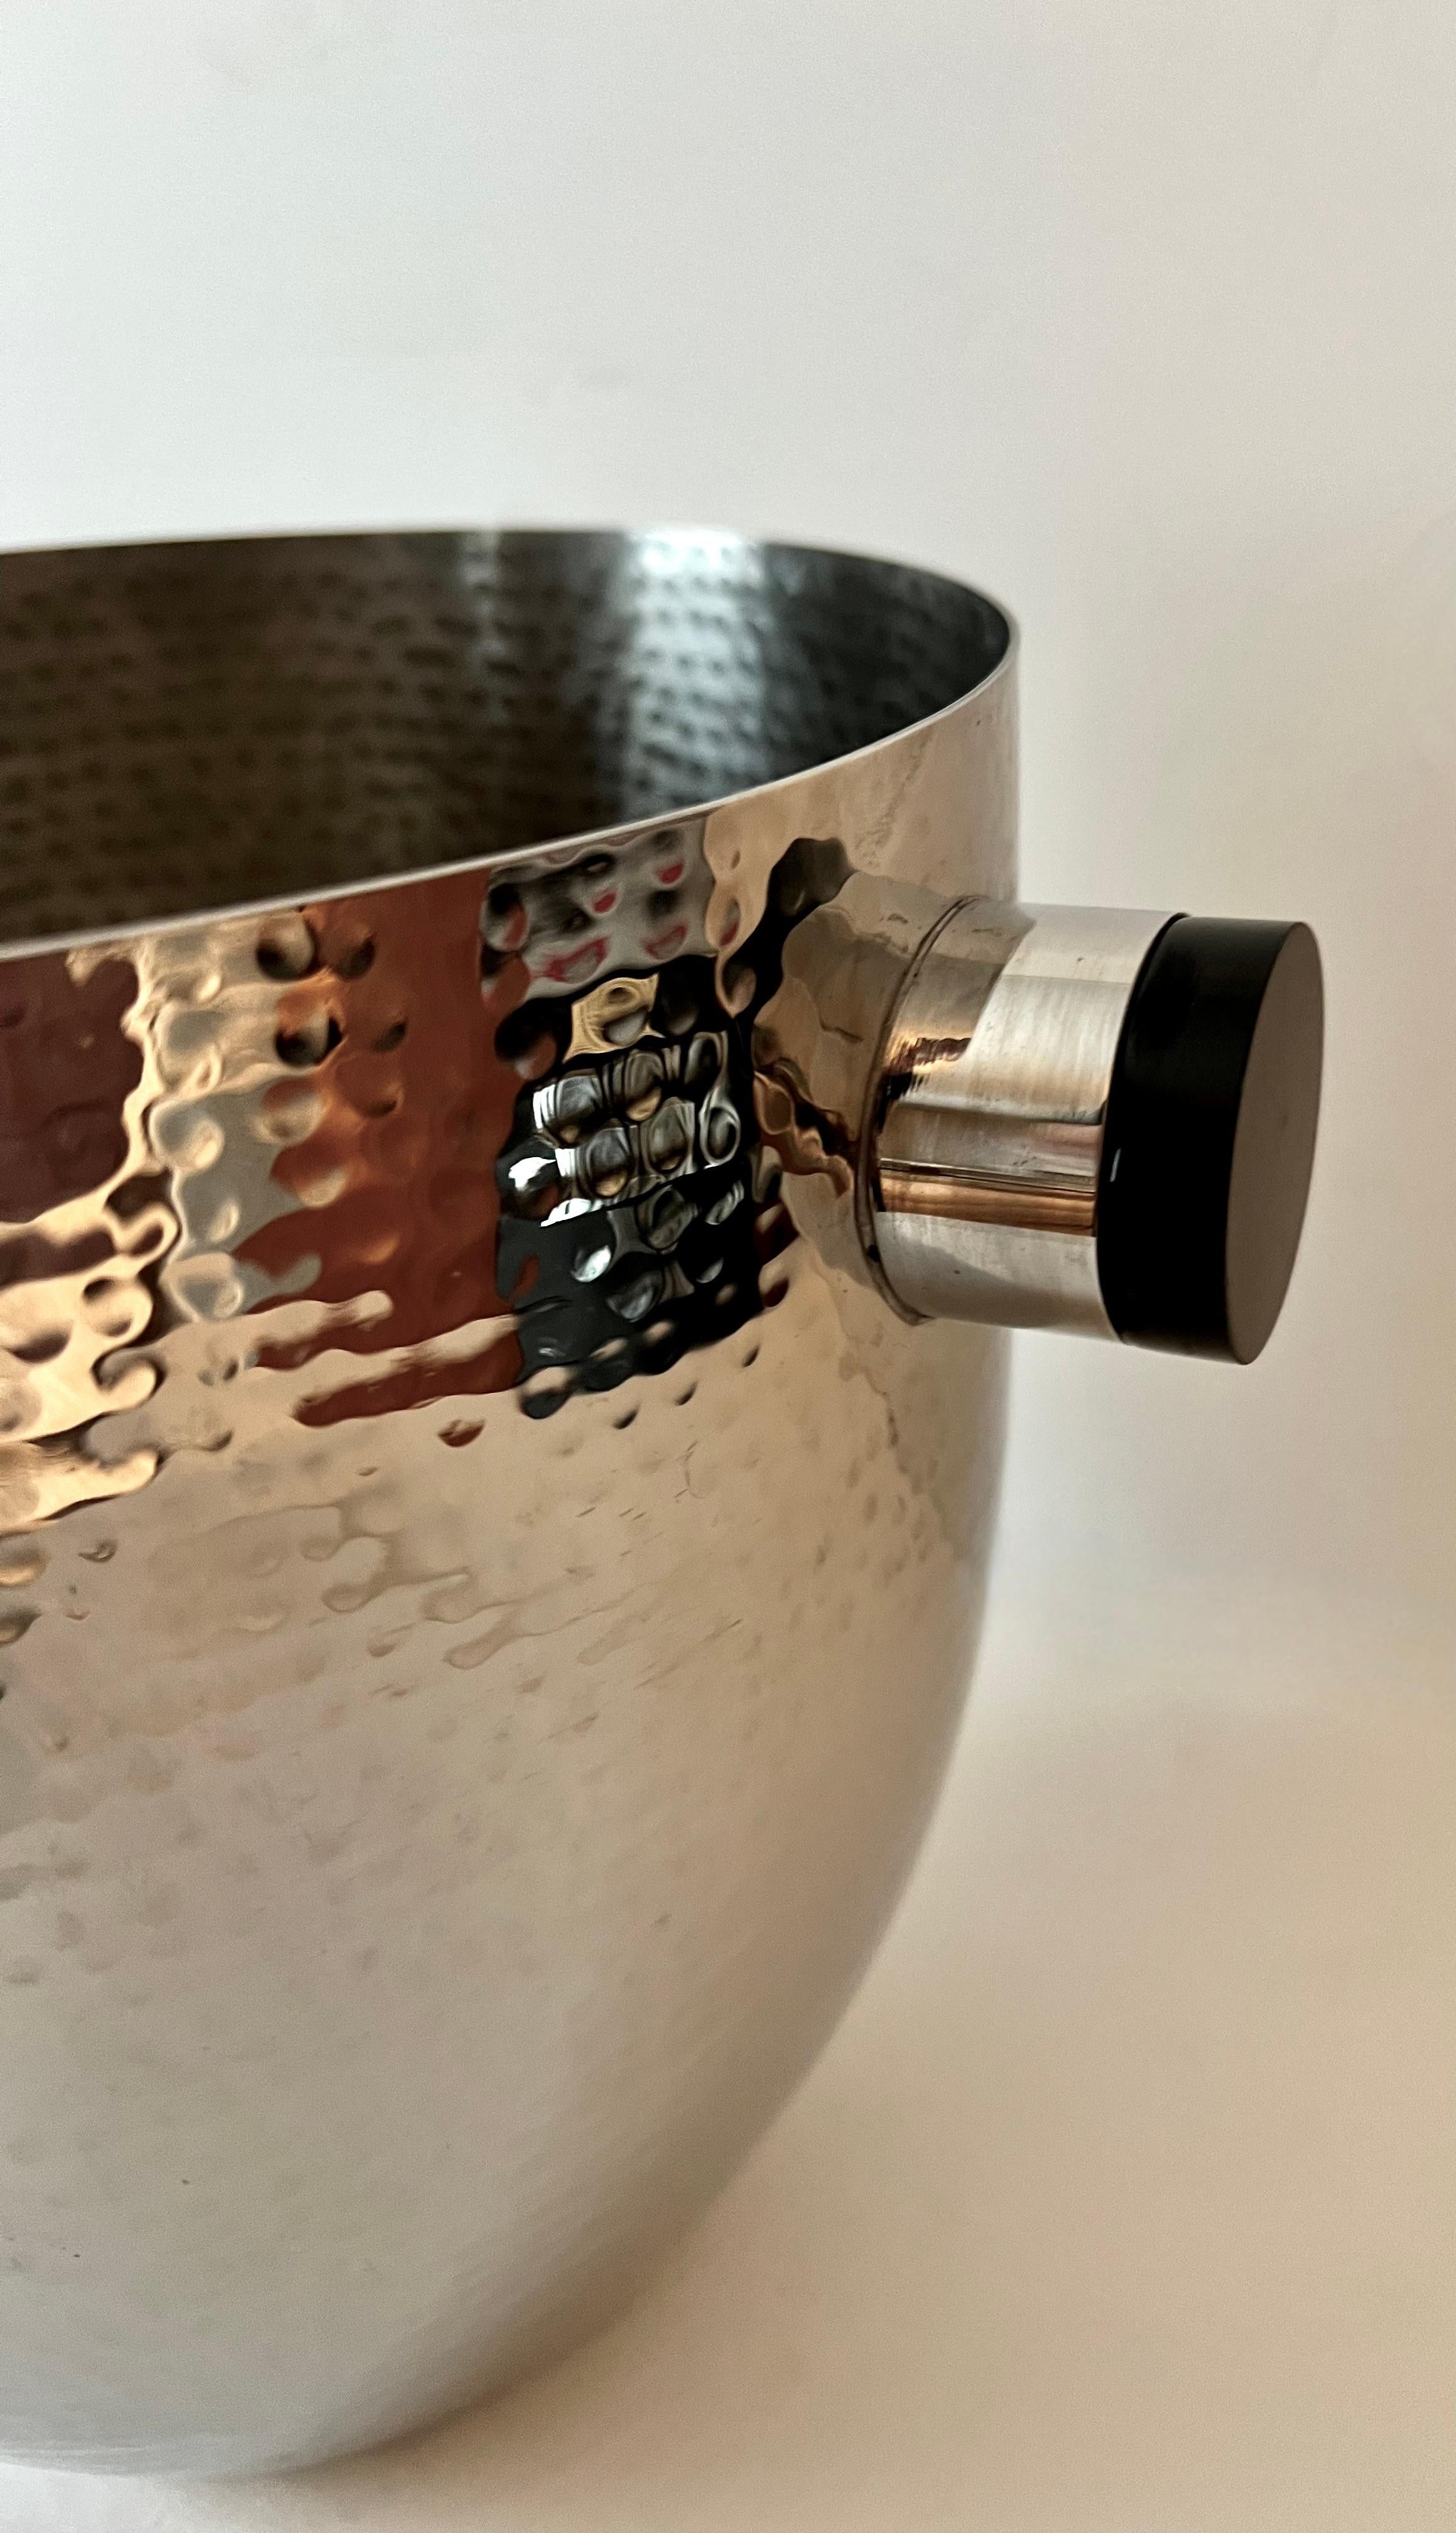 Hammered Stainless Steel Champagne Cooler or Ice Bucket with Black Resin Handles In Good Condition For Sale In Los Angeles, CA